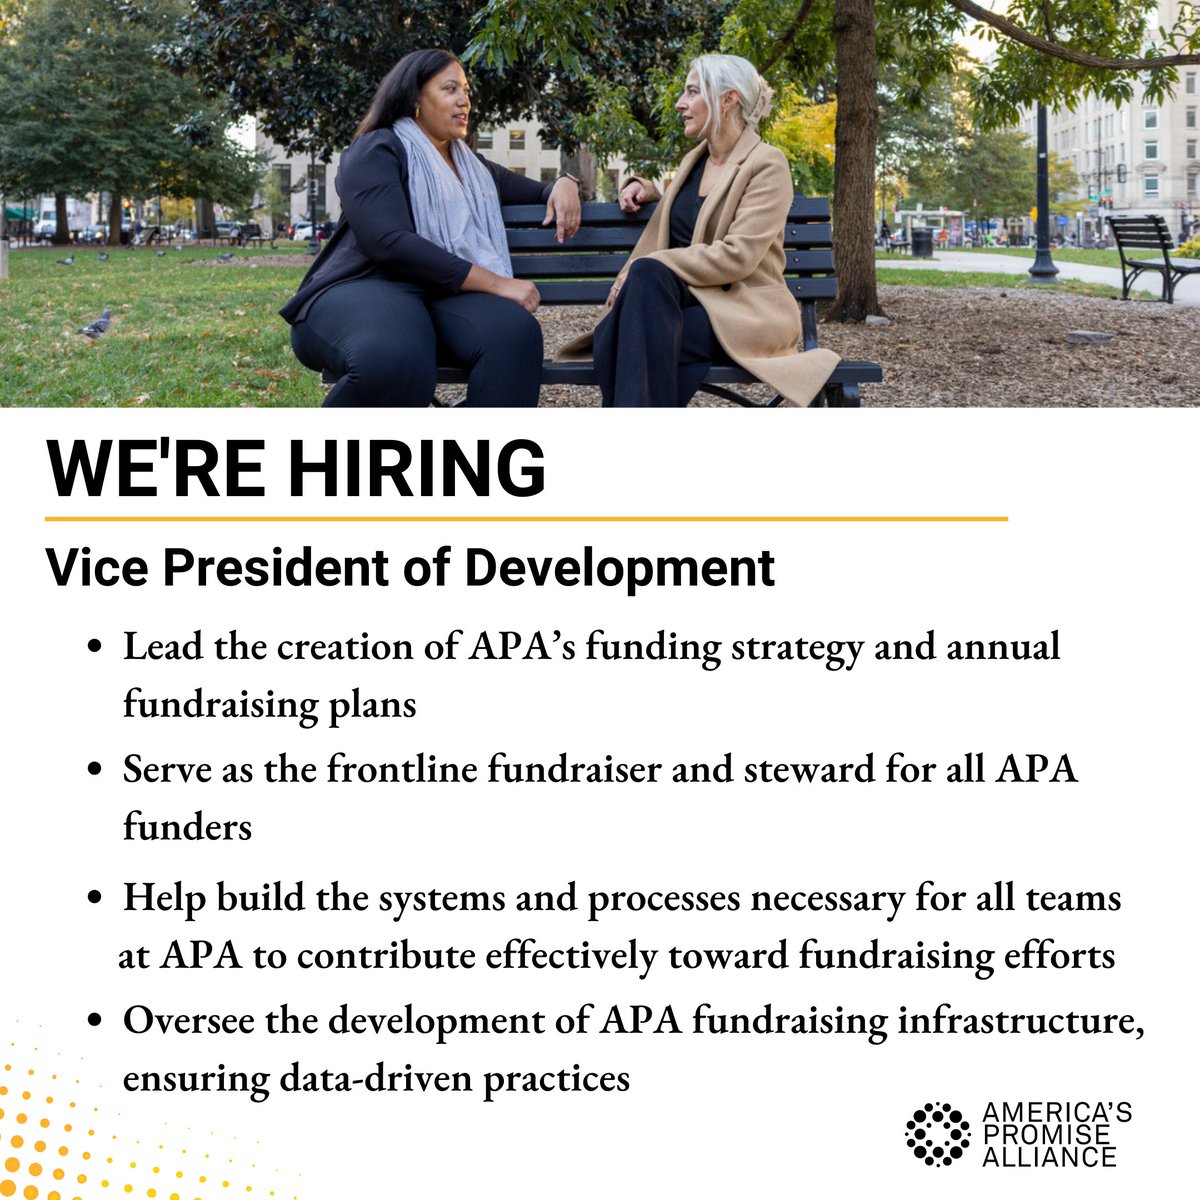 We’re hiring! The Vice President of Development (VPD) serves as the frontline fundraiser and steward for all APA funders. Learn more and apply: bit.ly/3PZb6oO